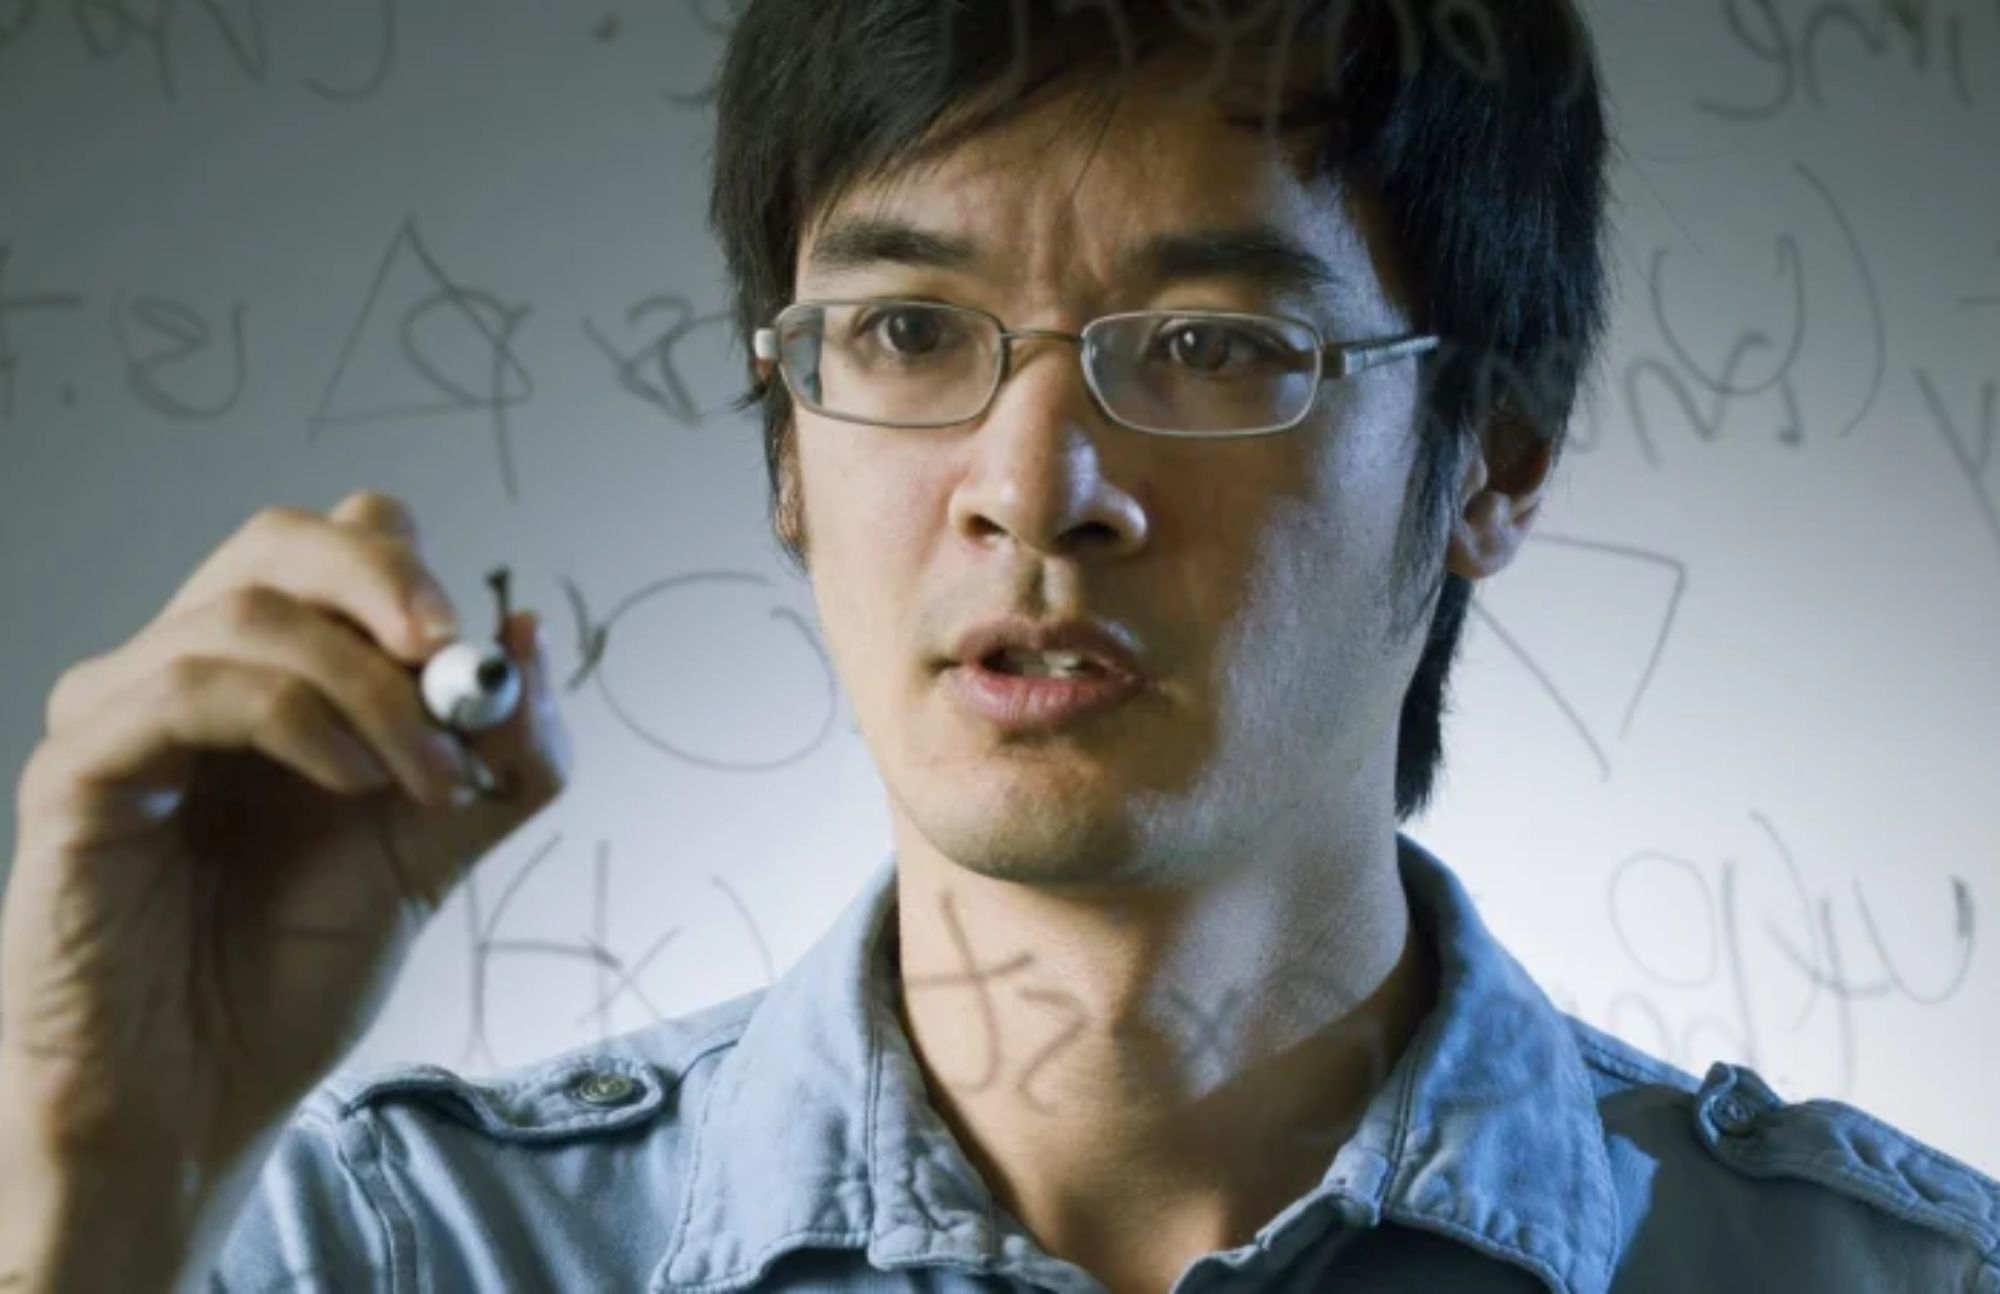 Terence Tao is writing equations in transparent architectural board